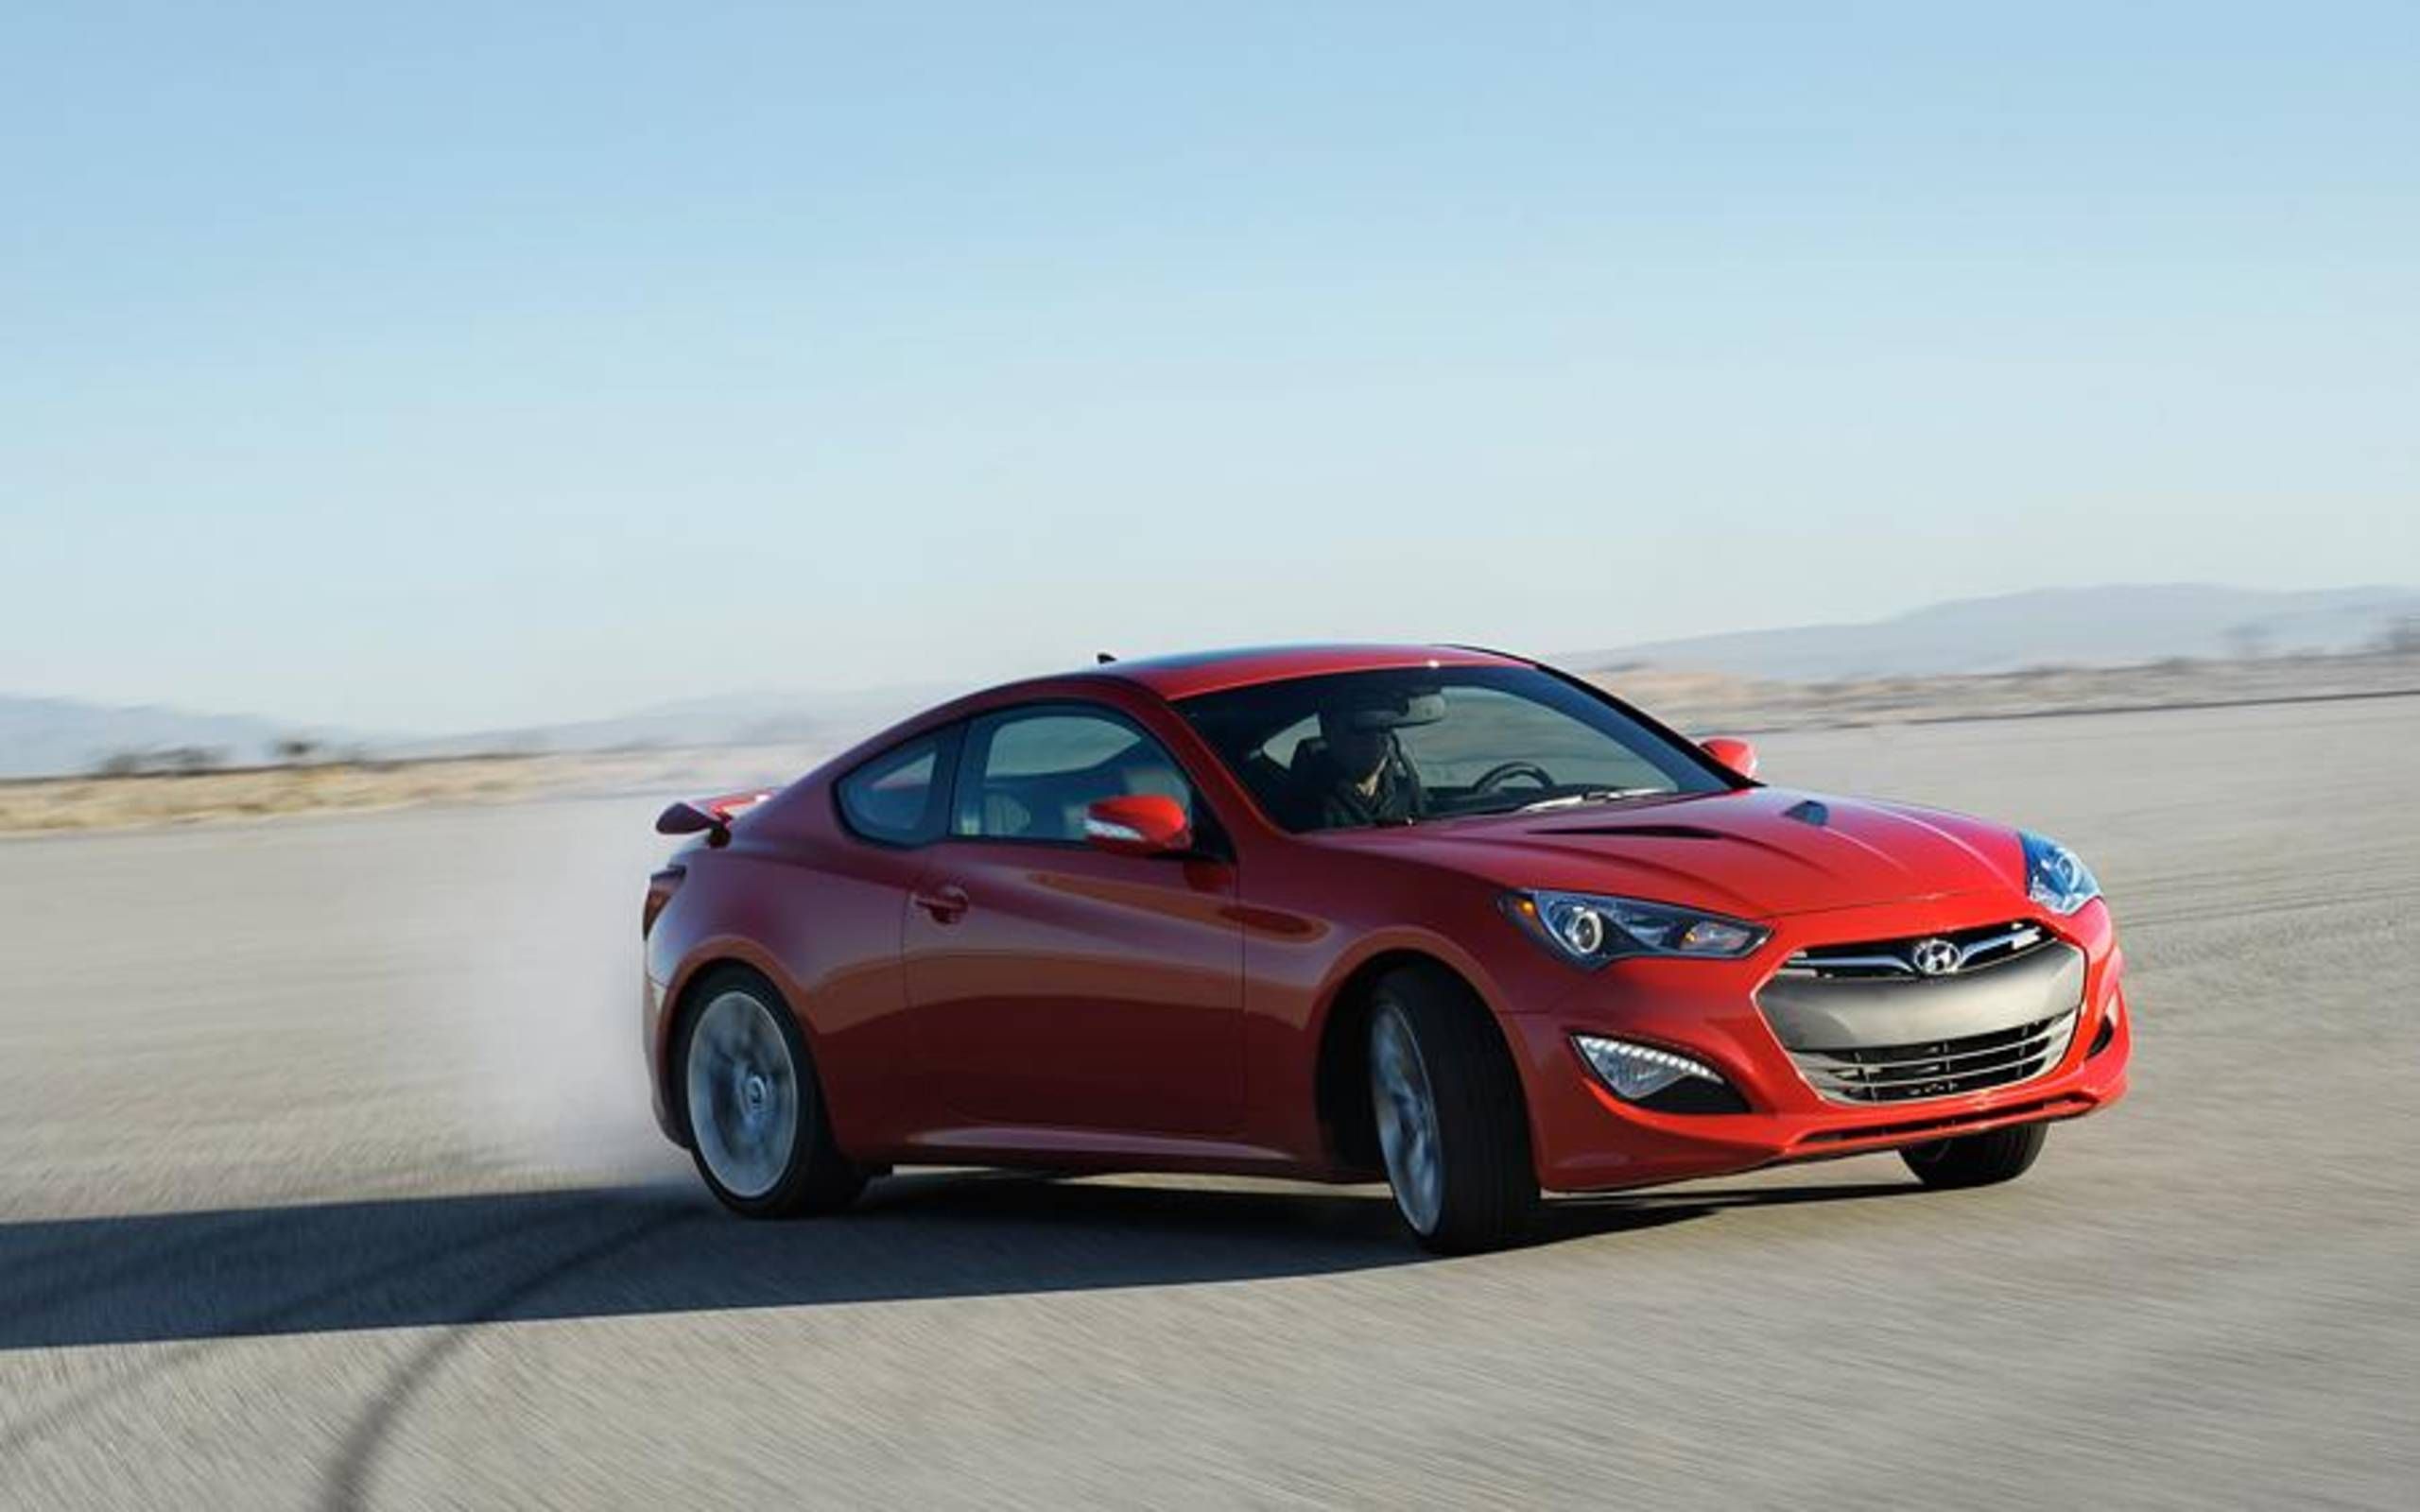 2013 Hyundai Genesis coupe 3.8 R-spec review notes gallery